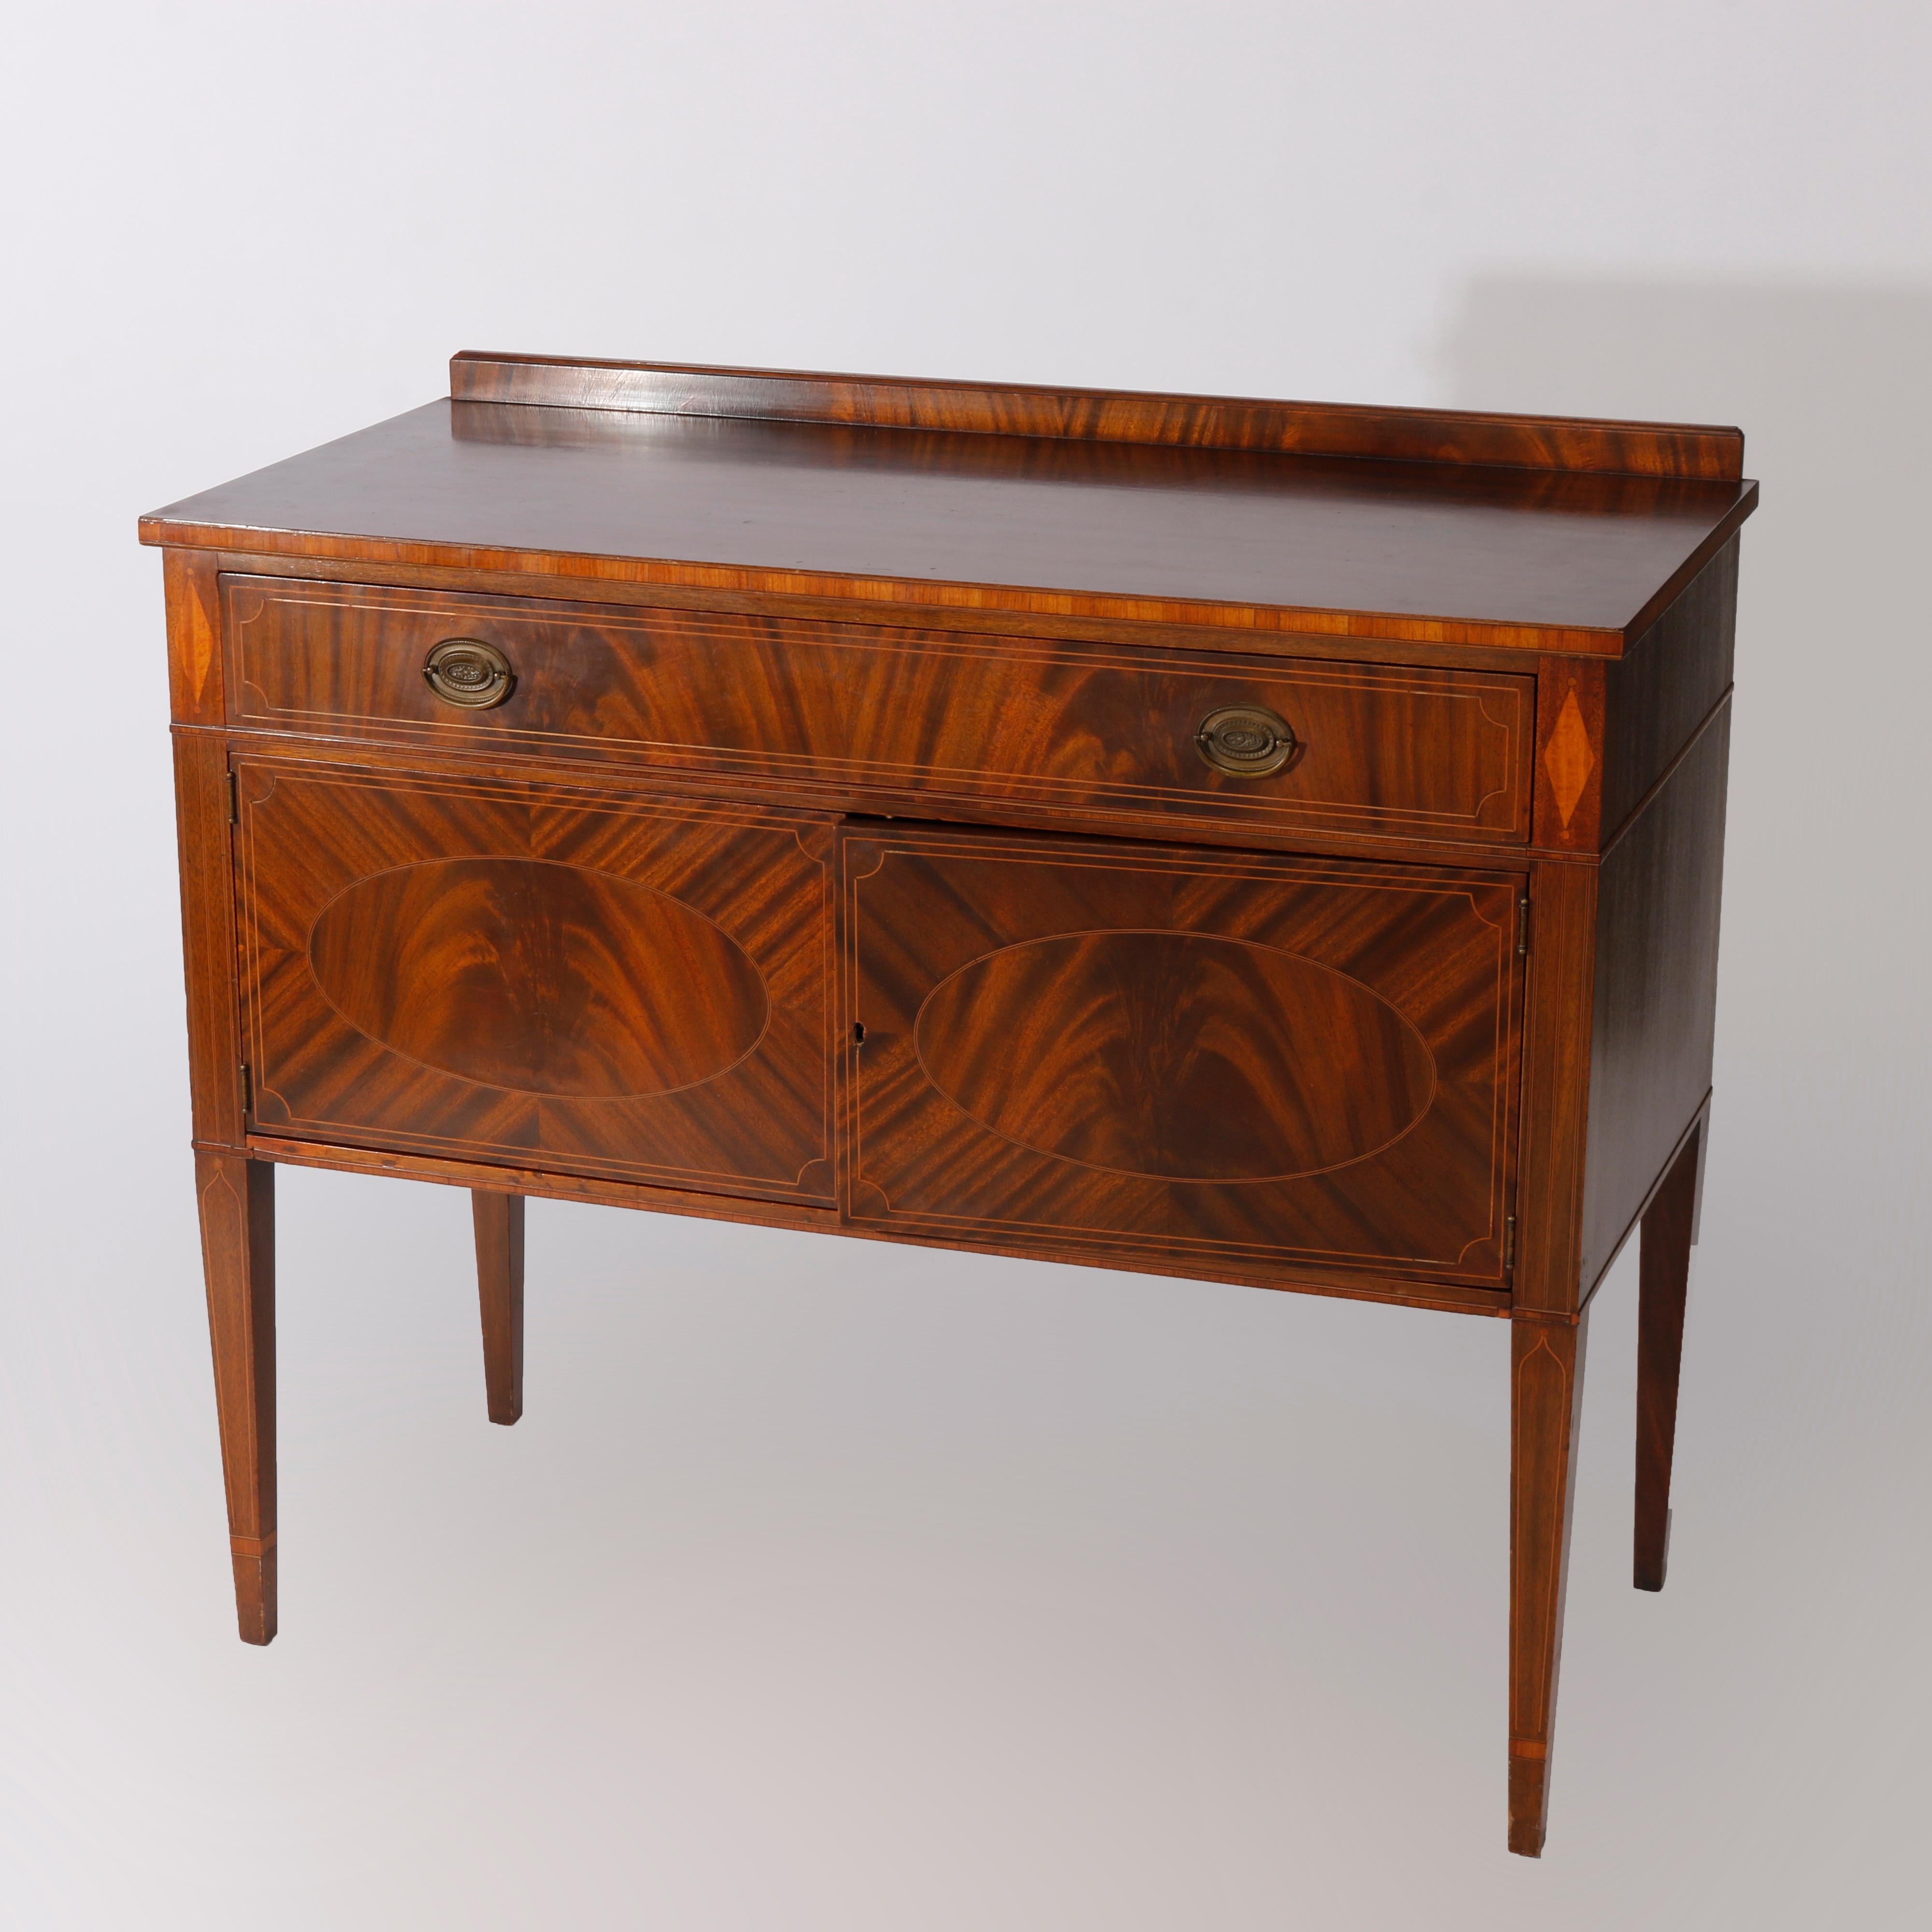 An antique English Hepplewhite style server offers flame mahogany construction with top having shallow backsplash over case with frieze drawer and double door lower cabinet, bookmatched facing and satinwood banding throughout, raised on straight and